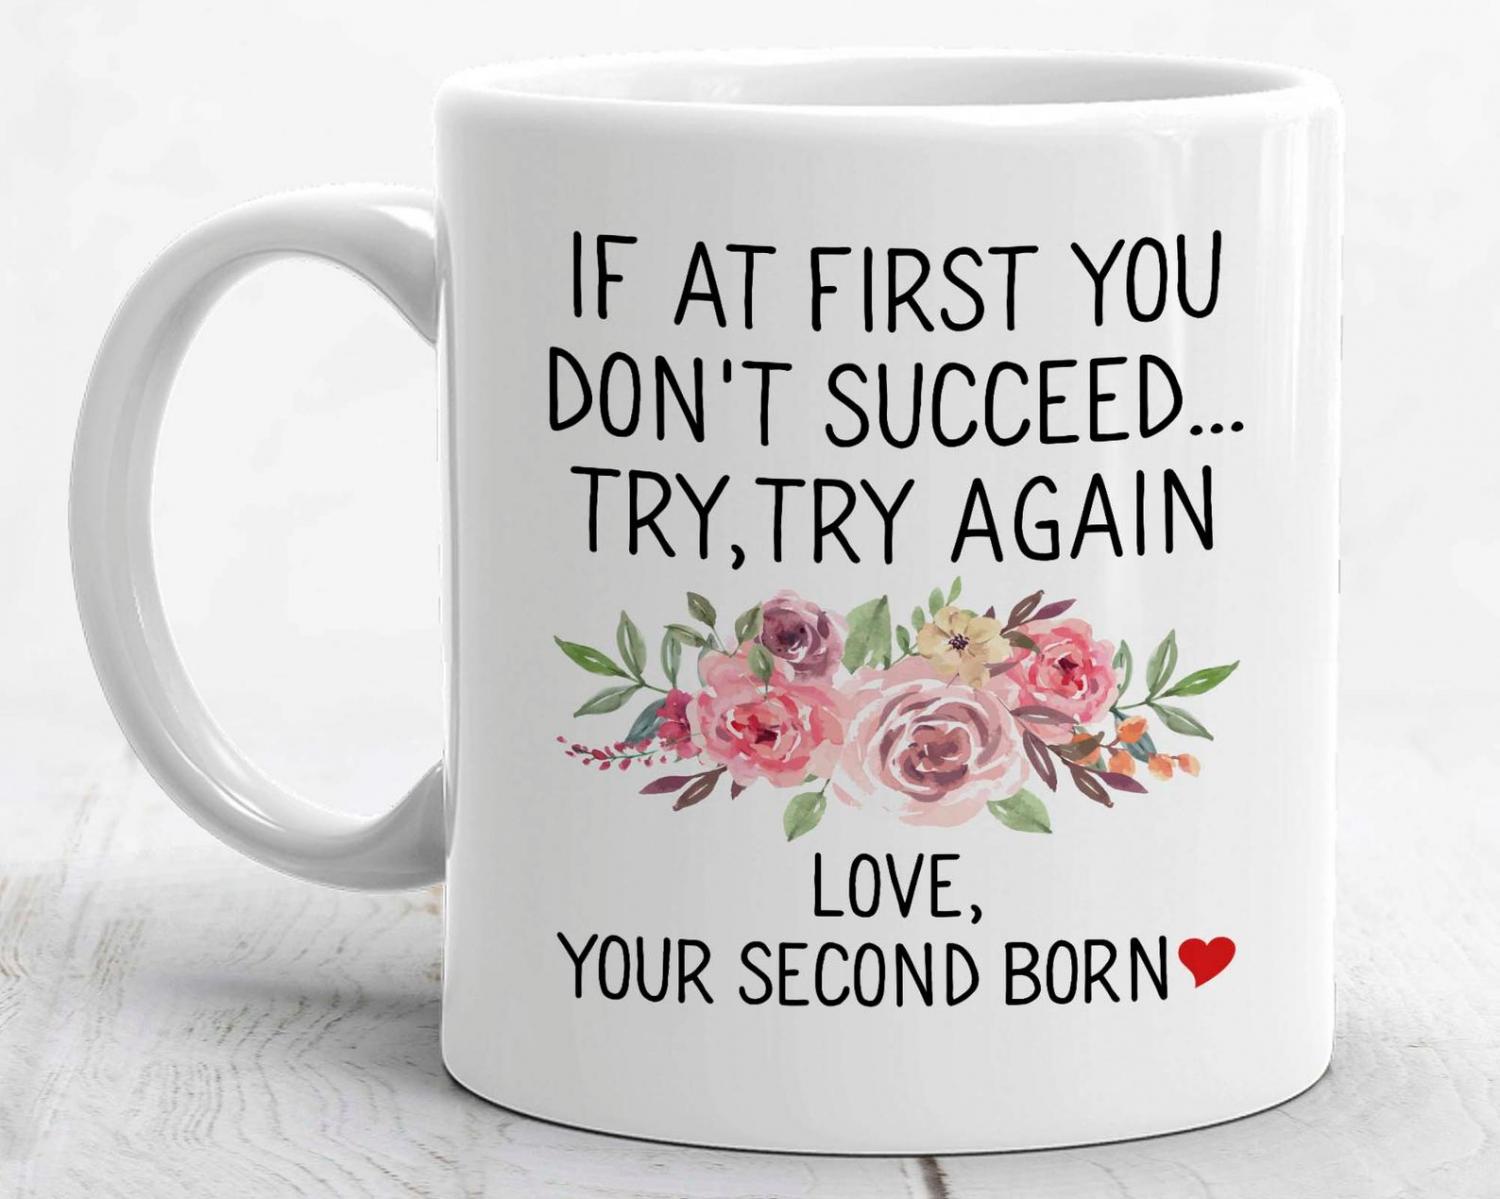 If at first you don't succeed, try, try again. -Love, Your Second Born - Funny mothers day coffee mug